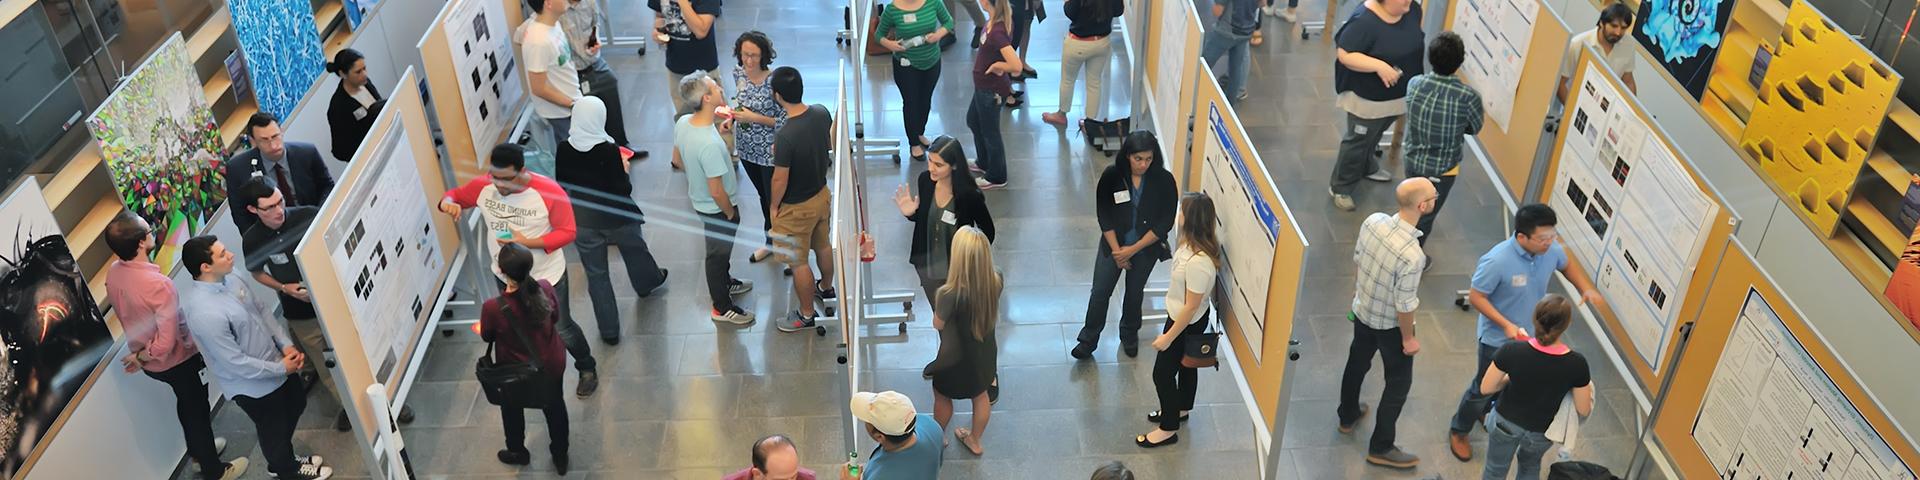 Research symposium poster session